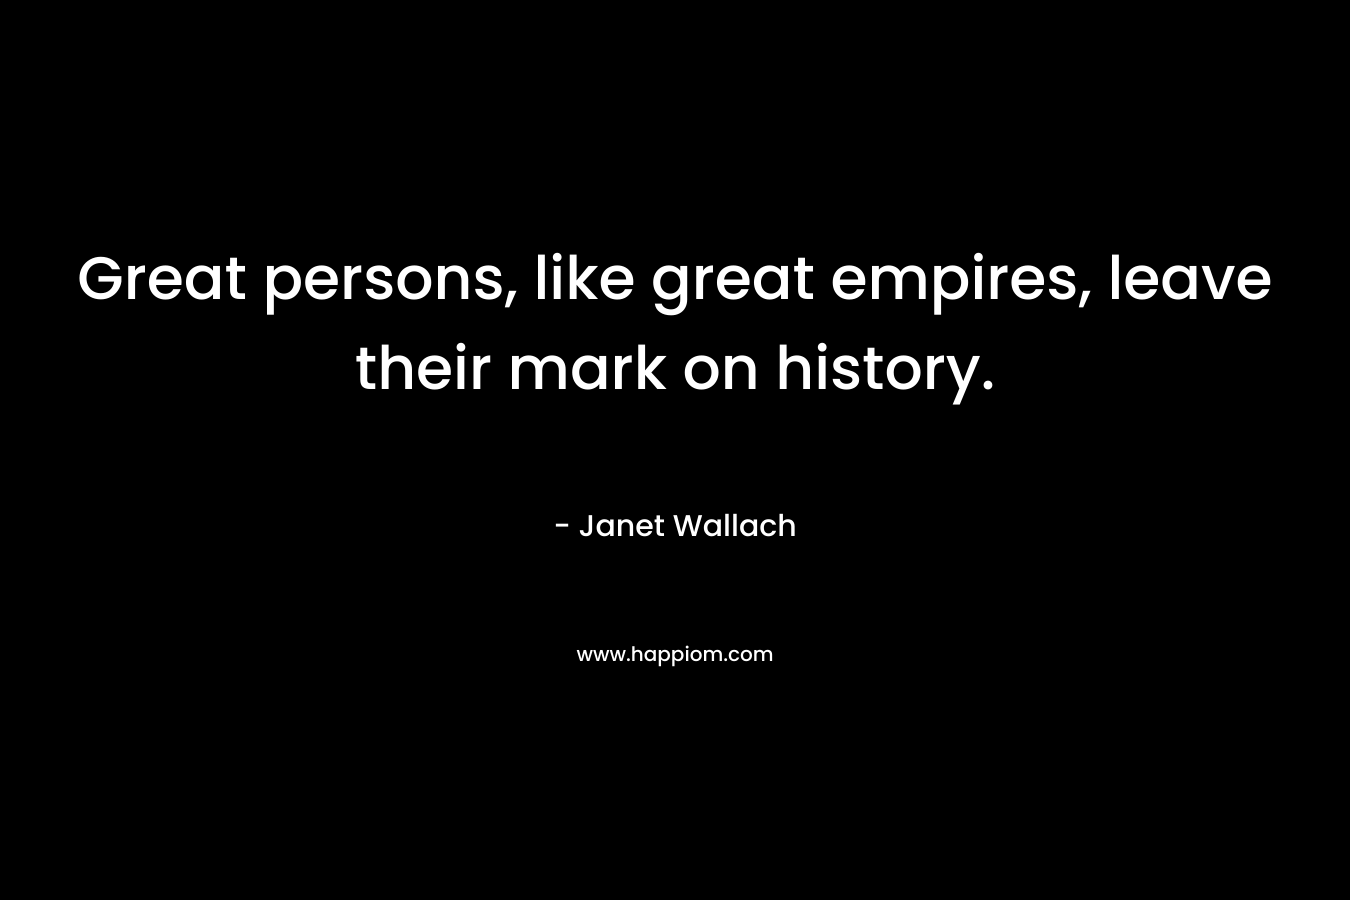 Great persons, like great empires, leave their mark on history.